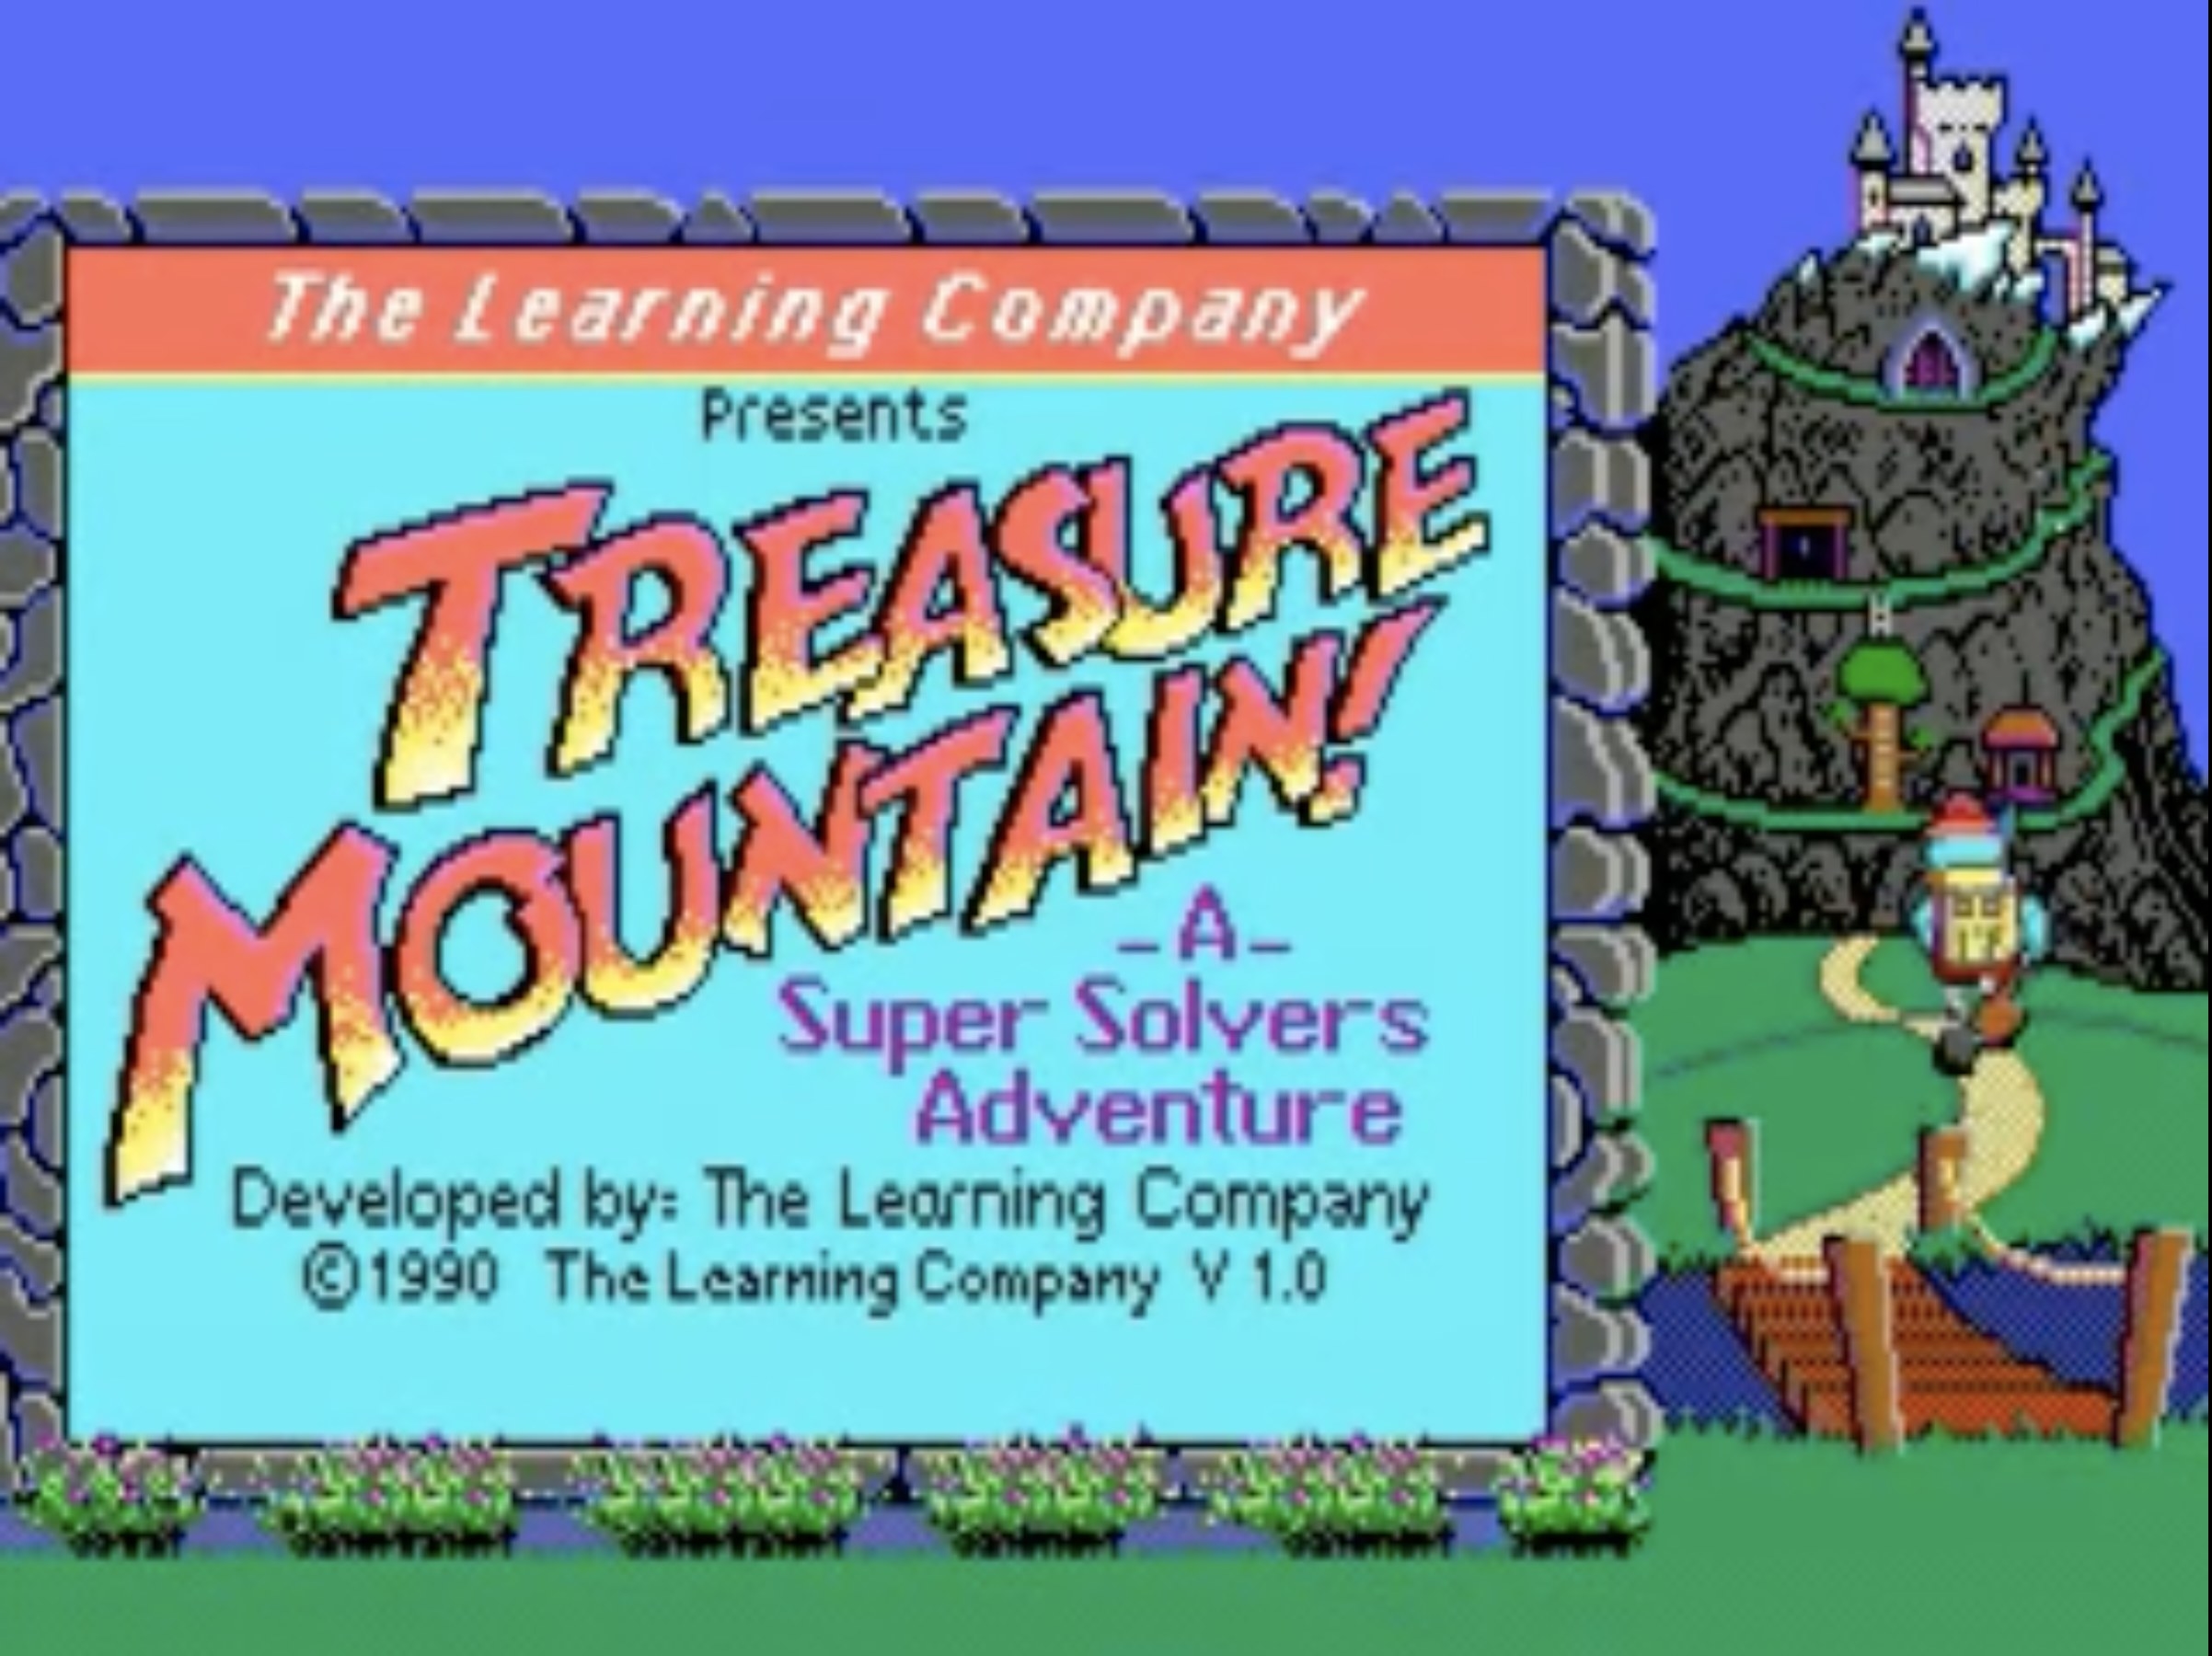 The title screen of the game, featuring the title and an adventurer waking toward the base of a mountain